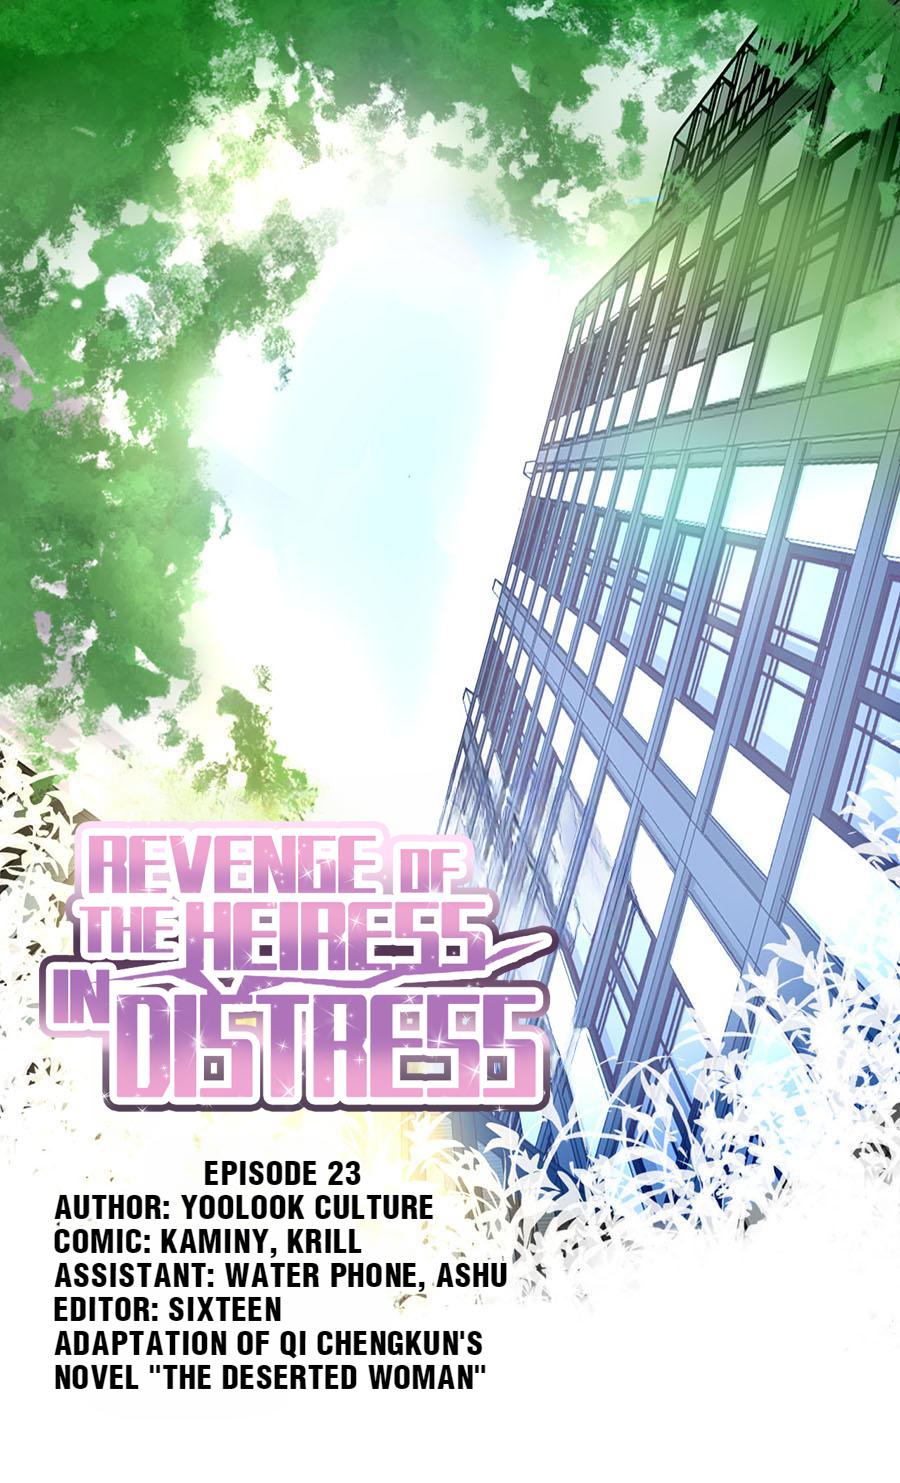 Revenge of the Heiress in Distress 23